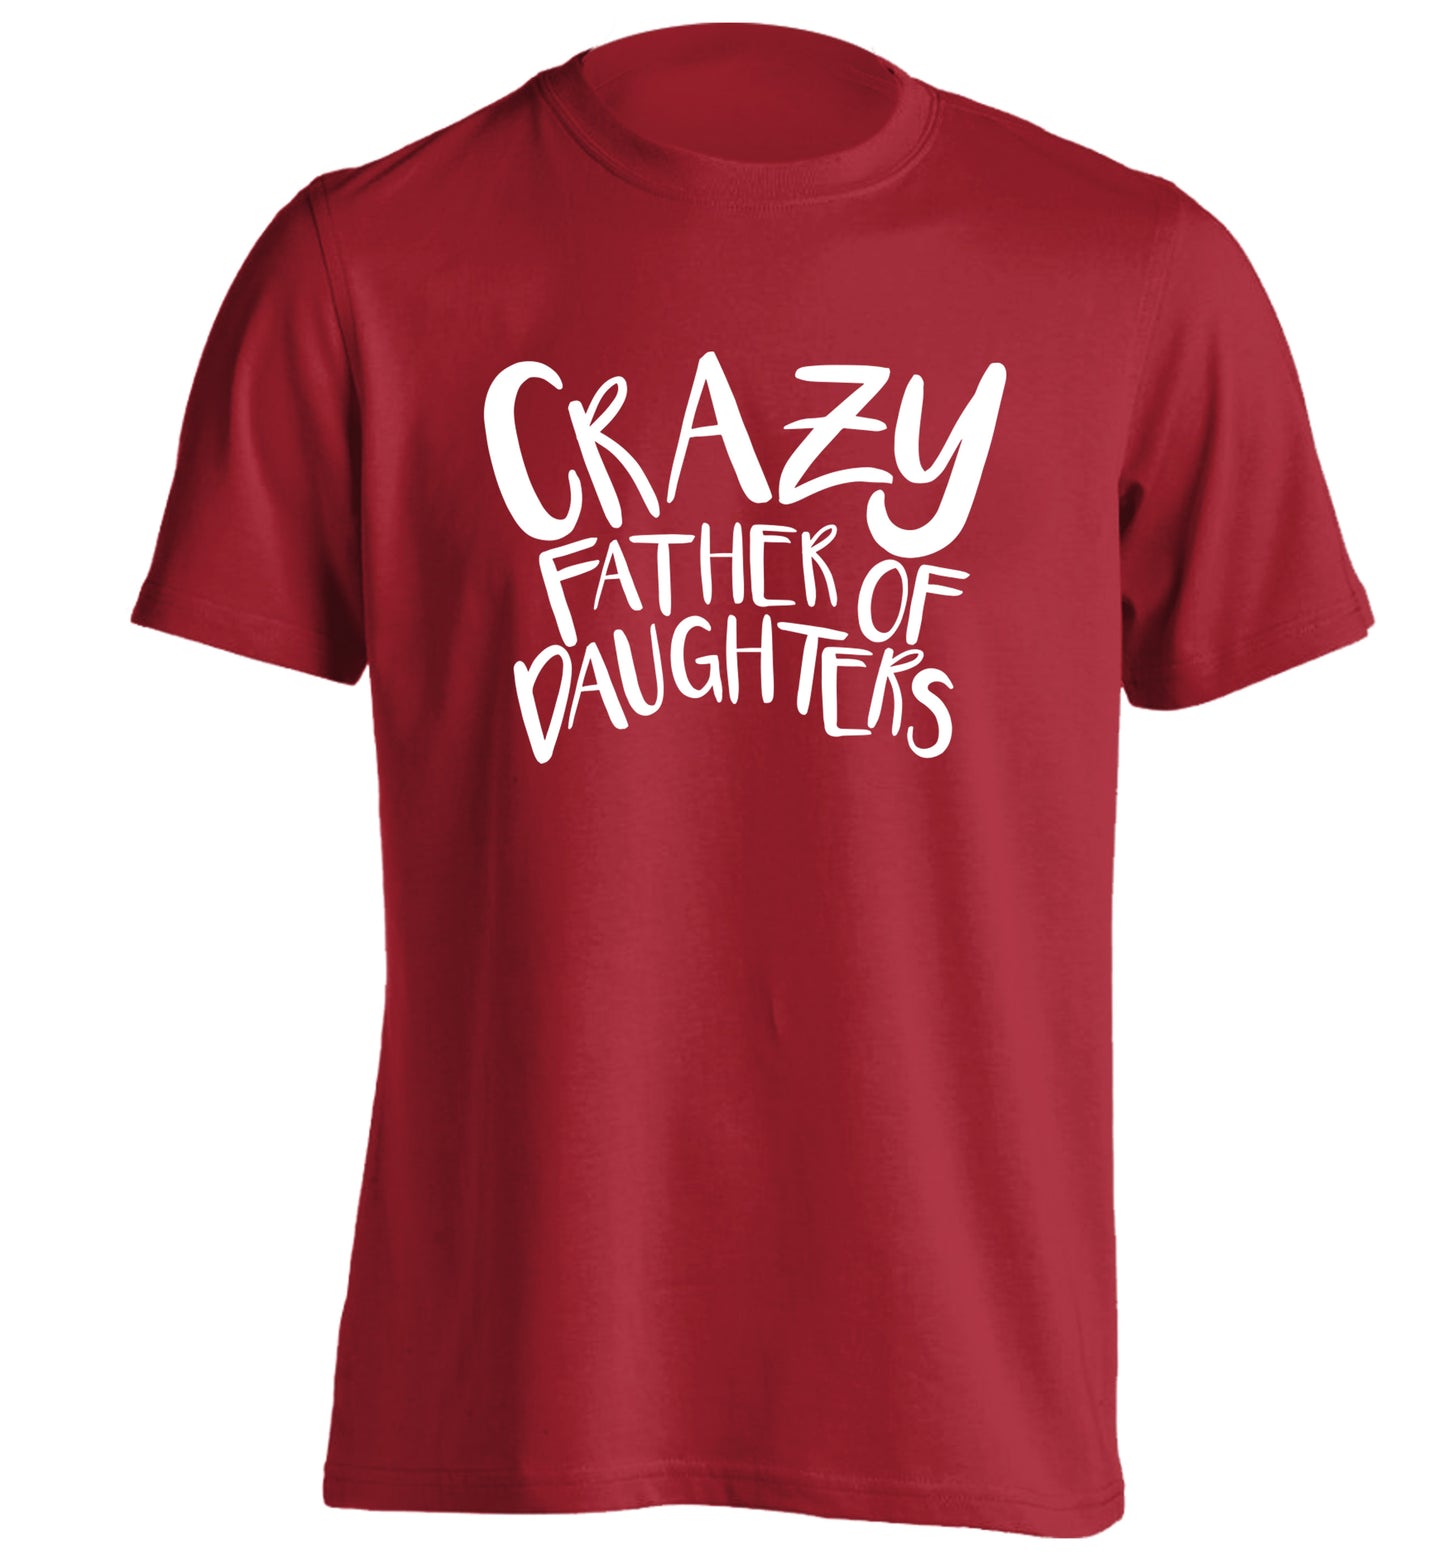 Crazy father of daughters adults unisex red Tshirt 2XL